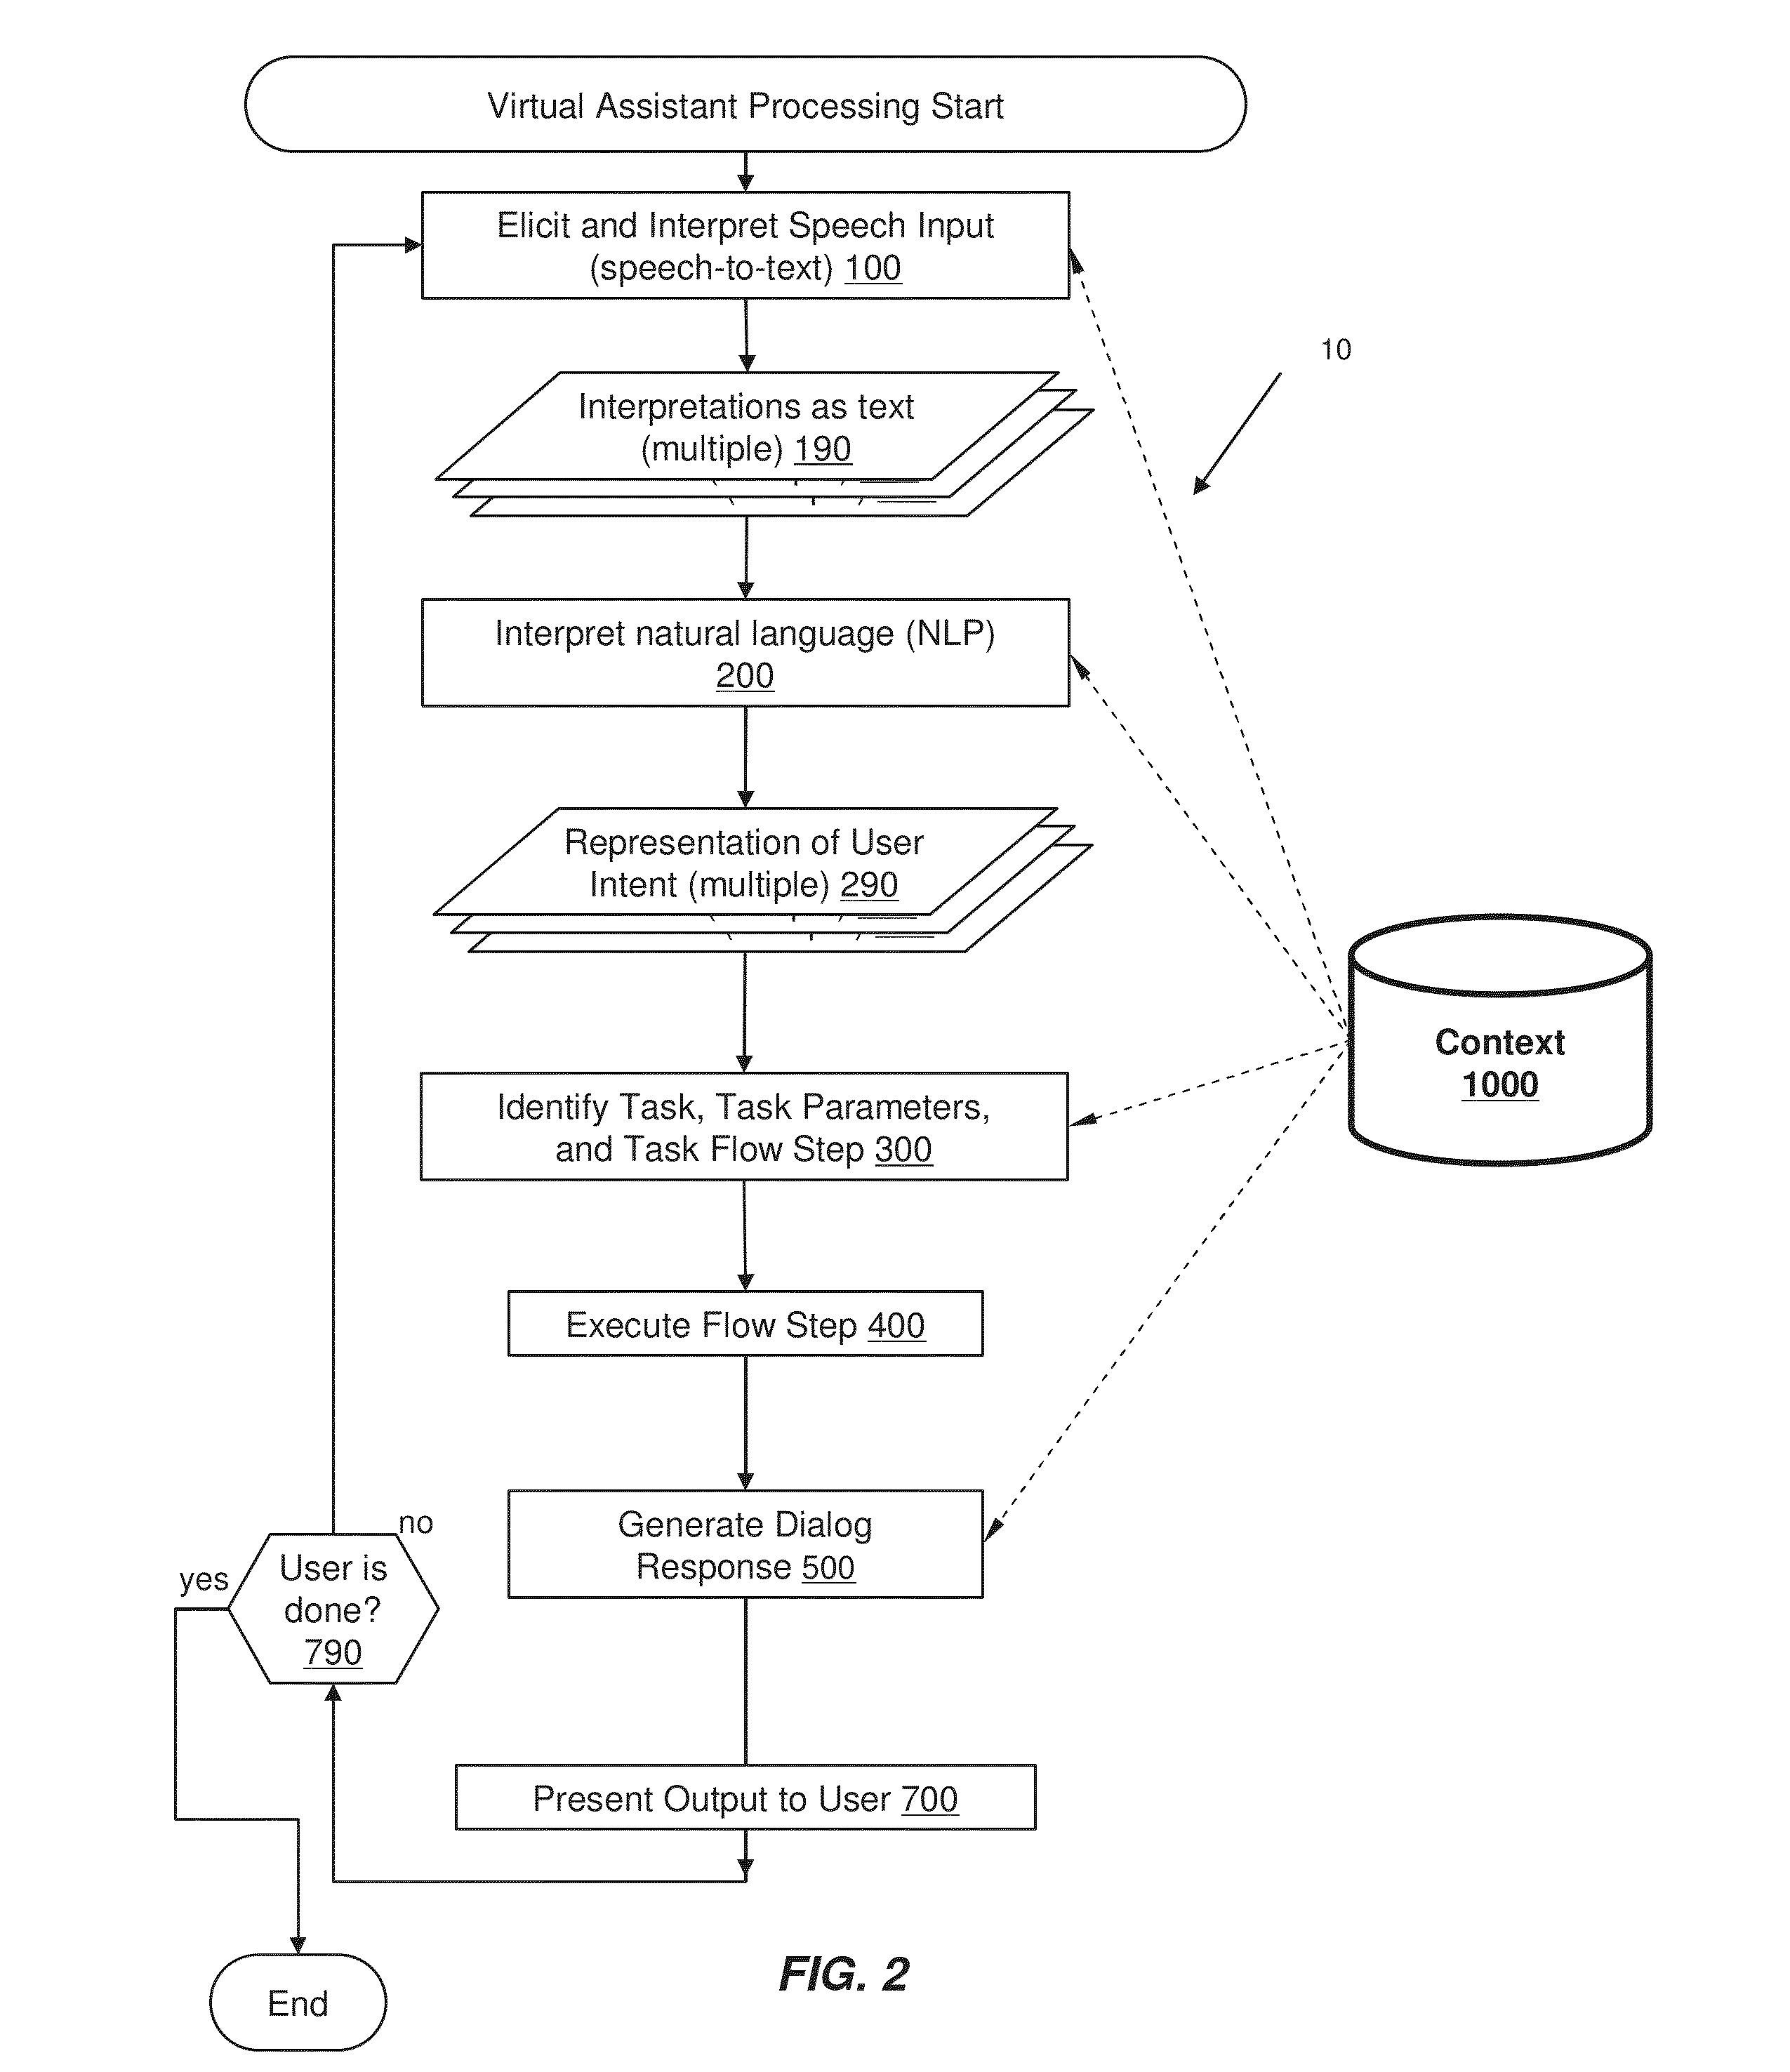 Using context information to facilitate processing of commands in a virtual assistant